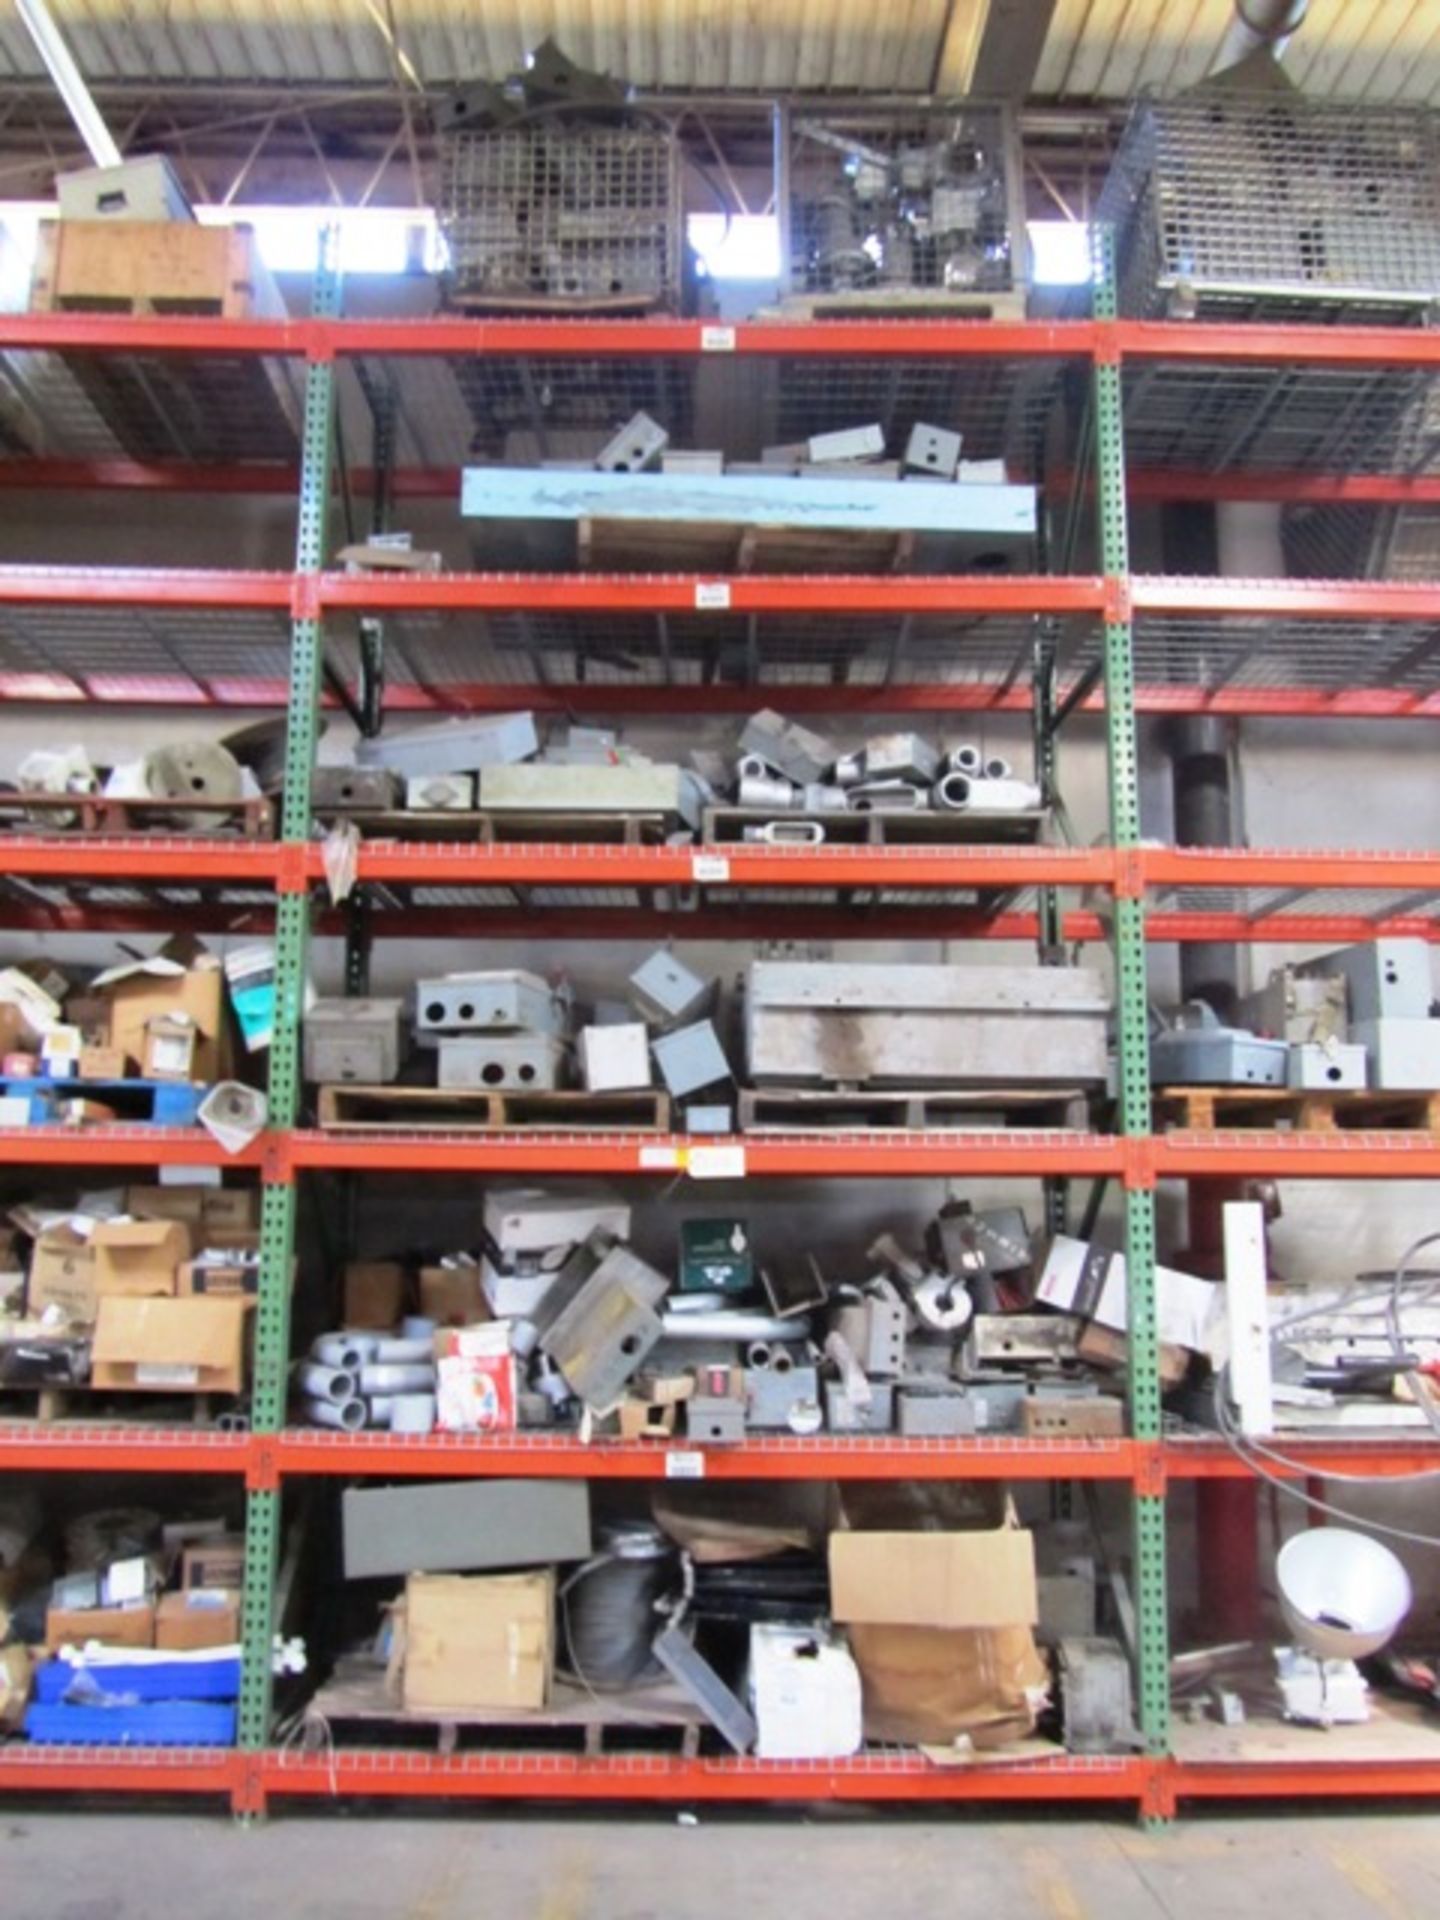 Contents of 6 Vertical Sections Pallet Racking consisting of Electrical Boxes, Shims